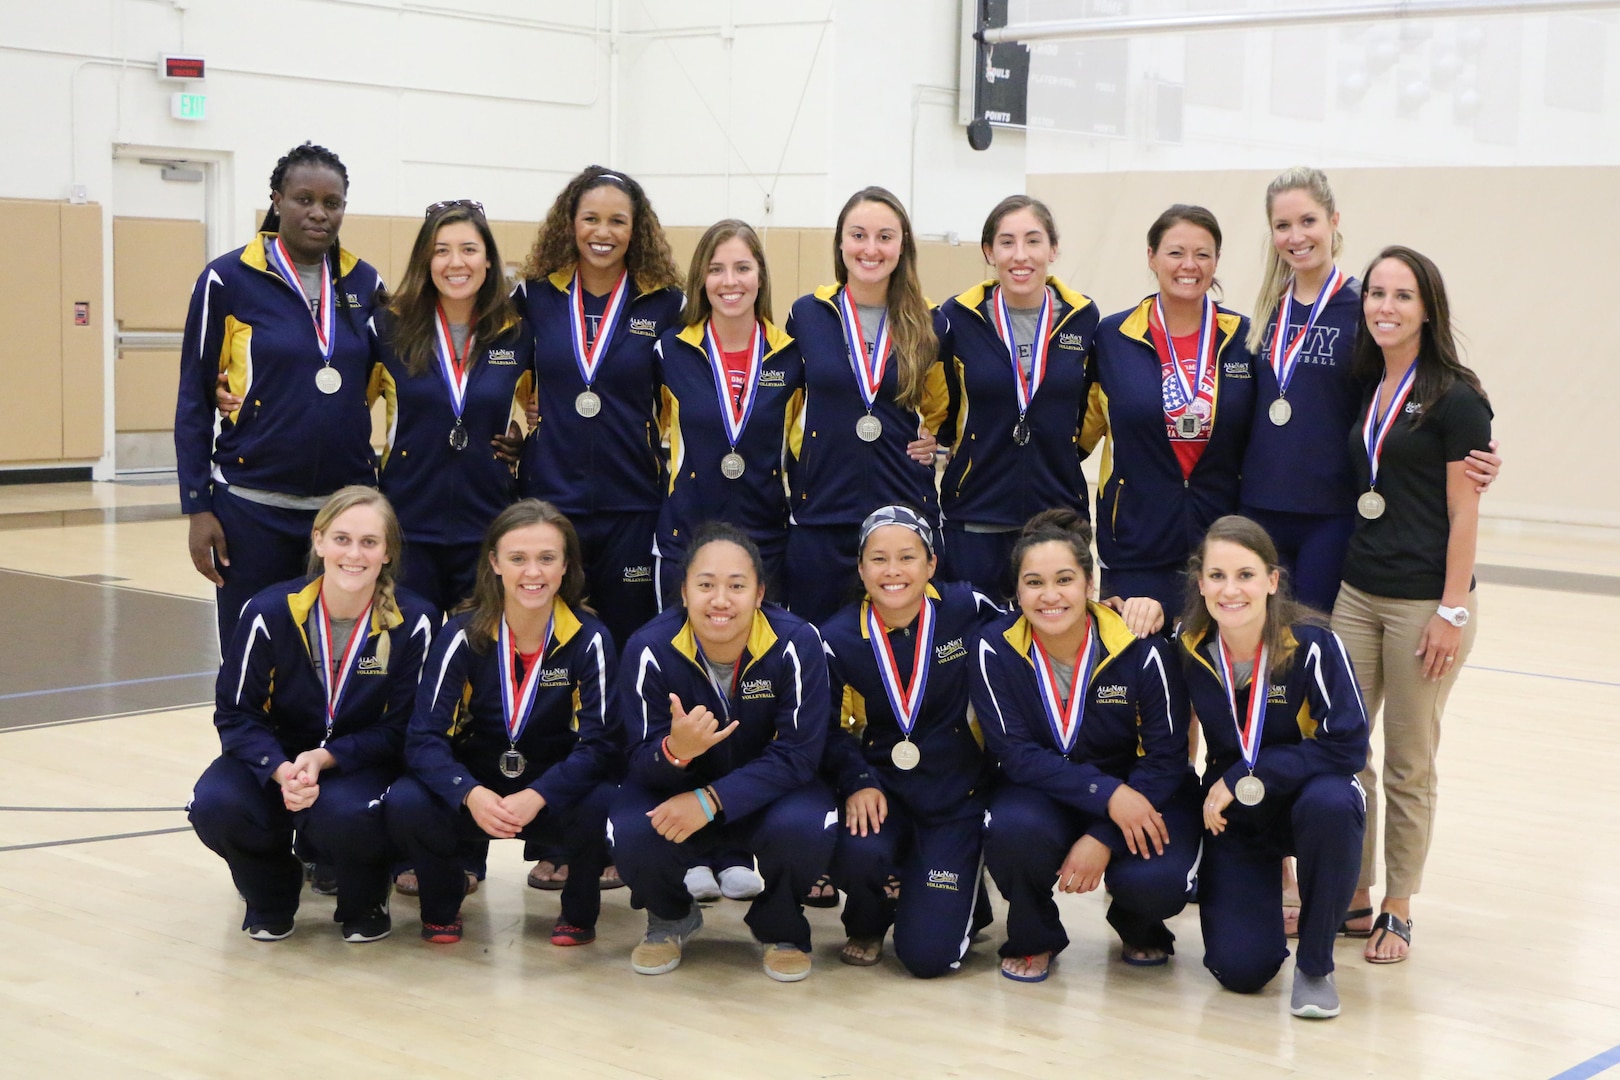 Navy wins the silver medal during the 2017 Armed Forces Women's Volleyball Championship at Naval Station Mayport, Florida held 17-21 May.